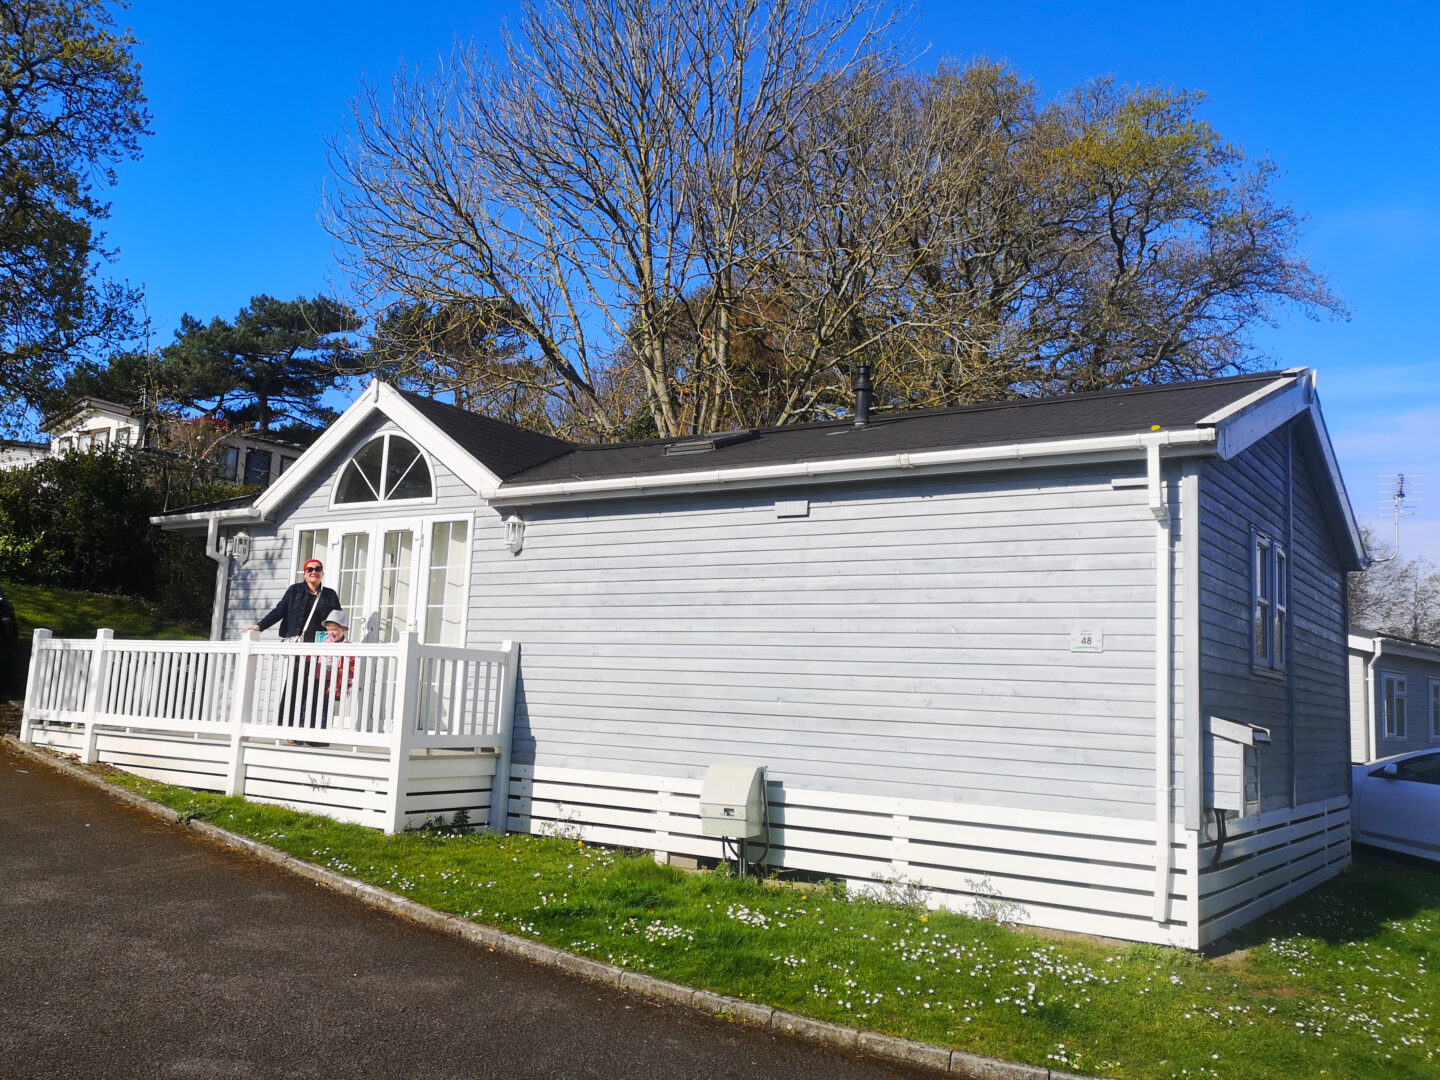  Shorefield Country Park, Shorefield Holidays, Self-catering Lodges, Holidays Park, Signature Lodge, Hot Tube, Dorset, Hampshire, Holiday Accommodation, Easter Break, Family-Friendly, Travel Reviews, Family Review, the Frenchie Mummy 